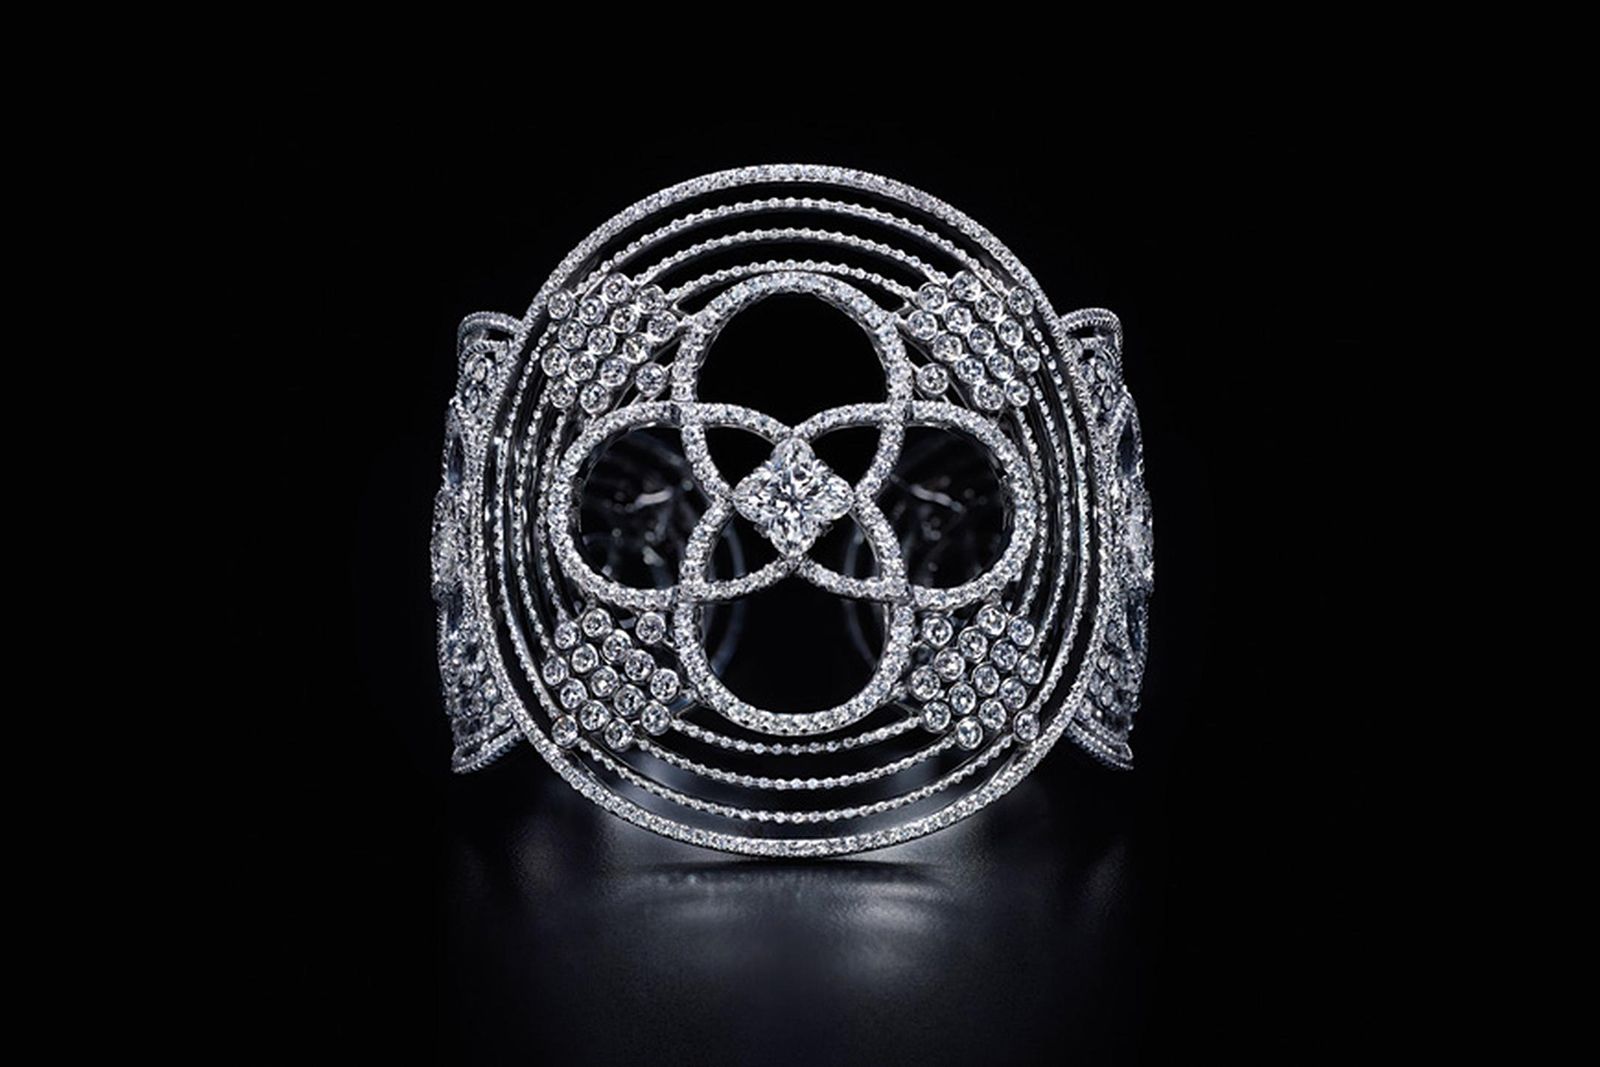 This is how Houdini inspired Louis Vuitton's latest High Jewellery